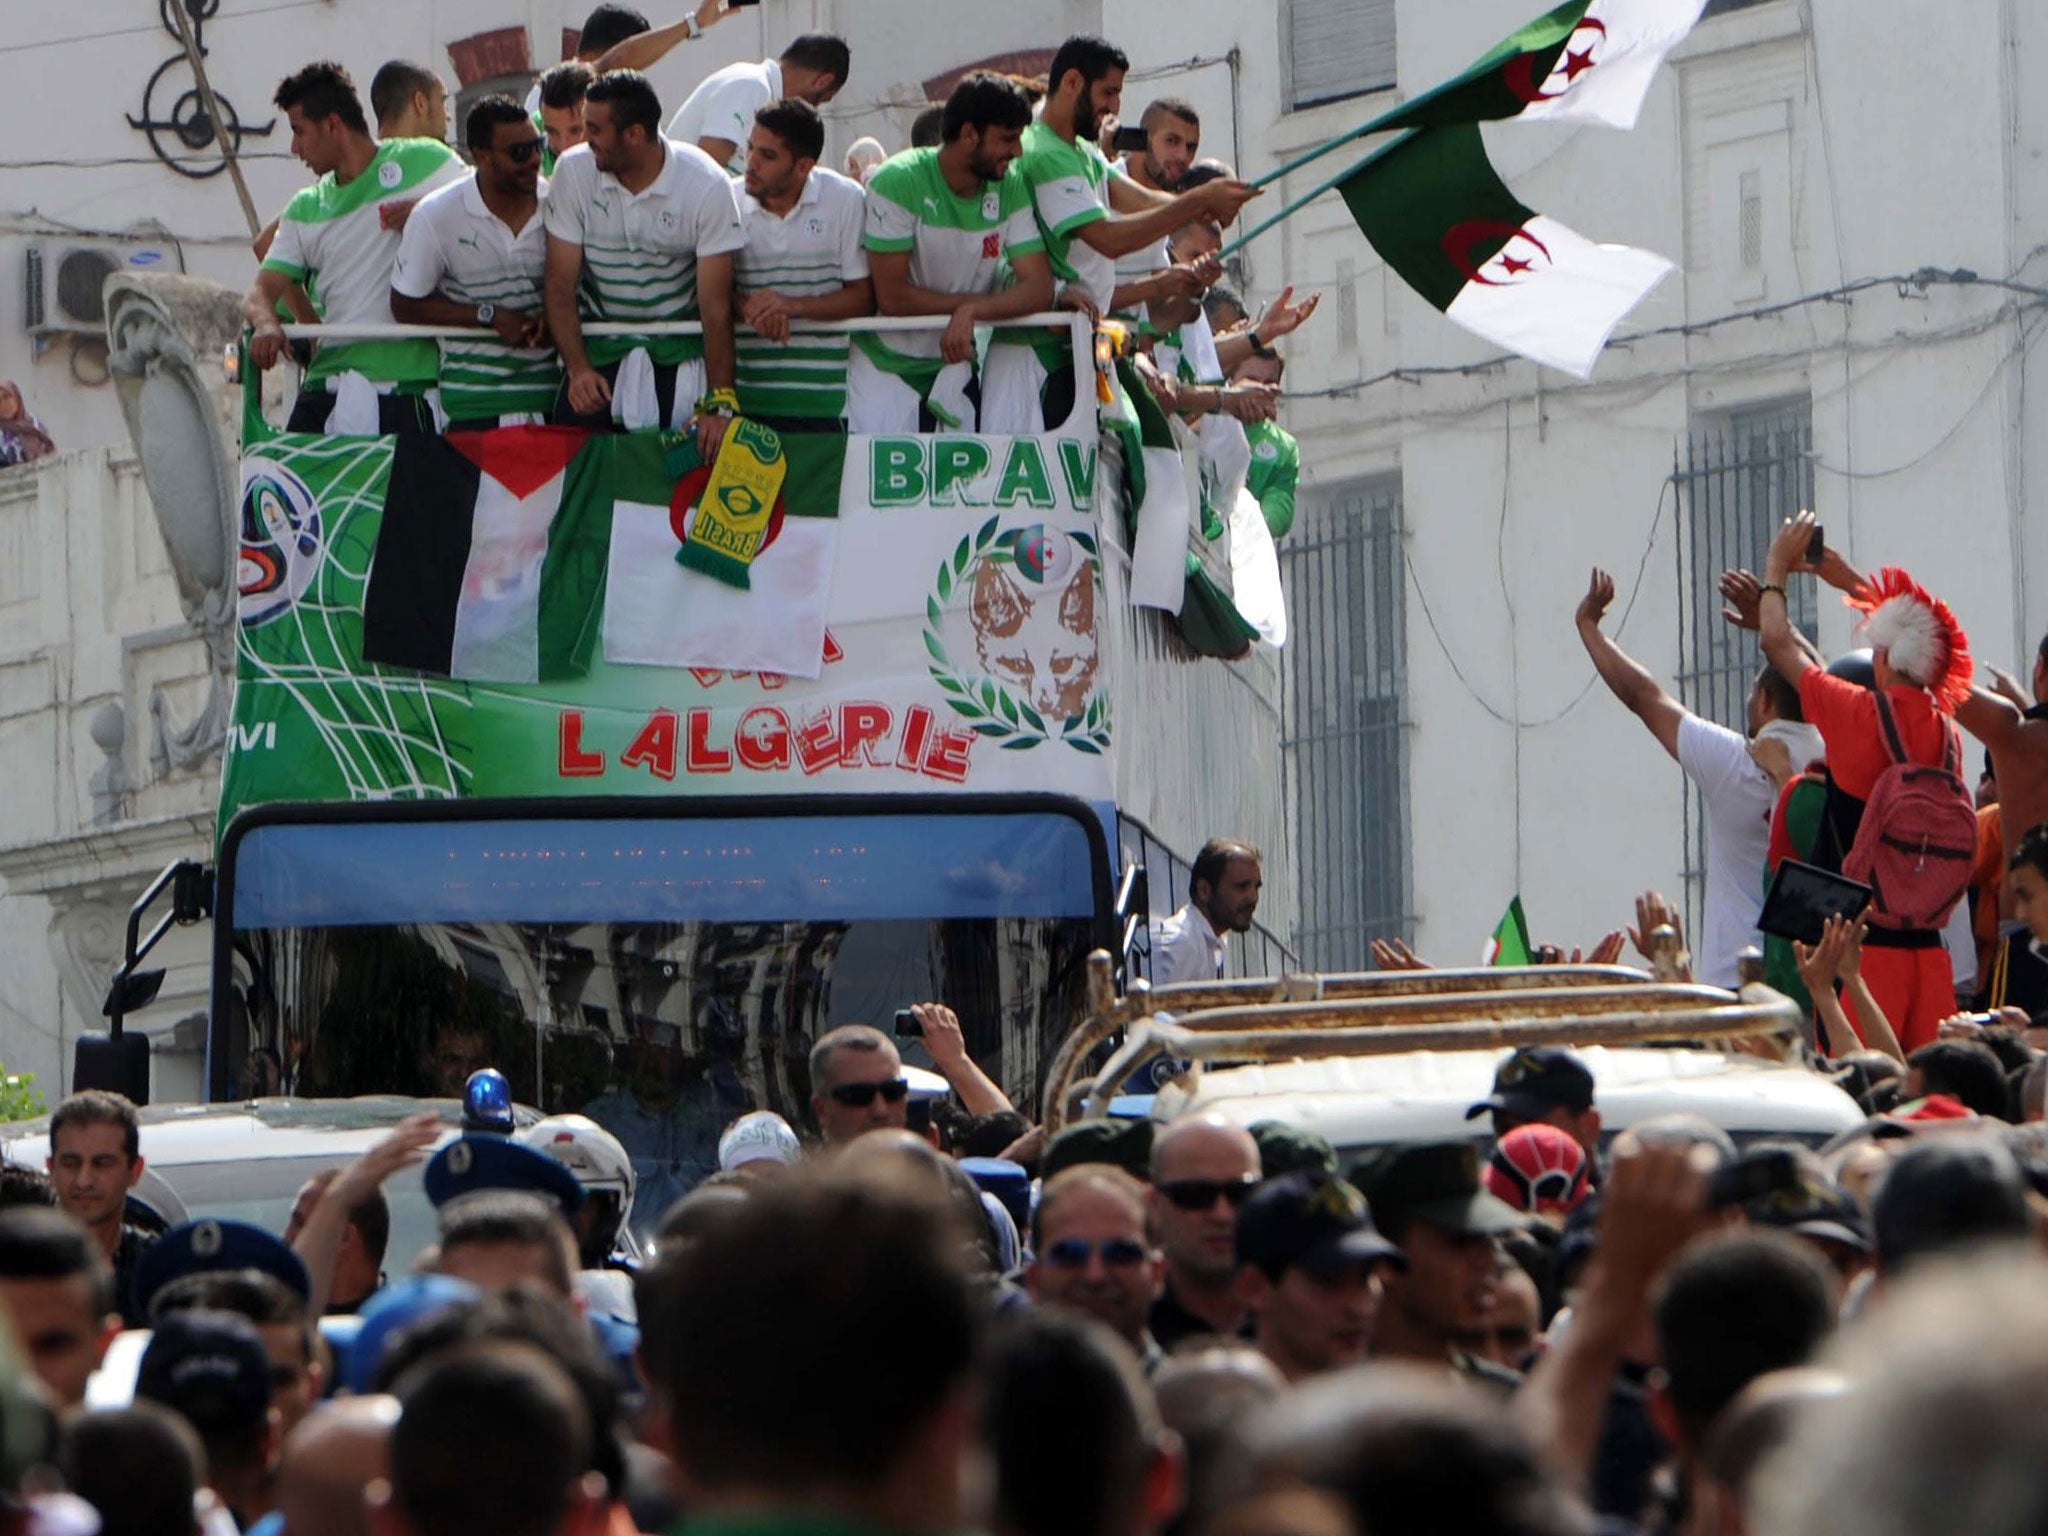 The Algeria World Cup team on their open-bus tour through Algiers. A Palestinian flag can be seen draped from the front of the bus